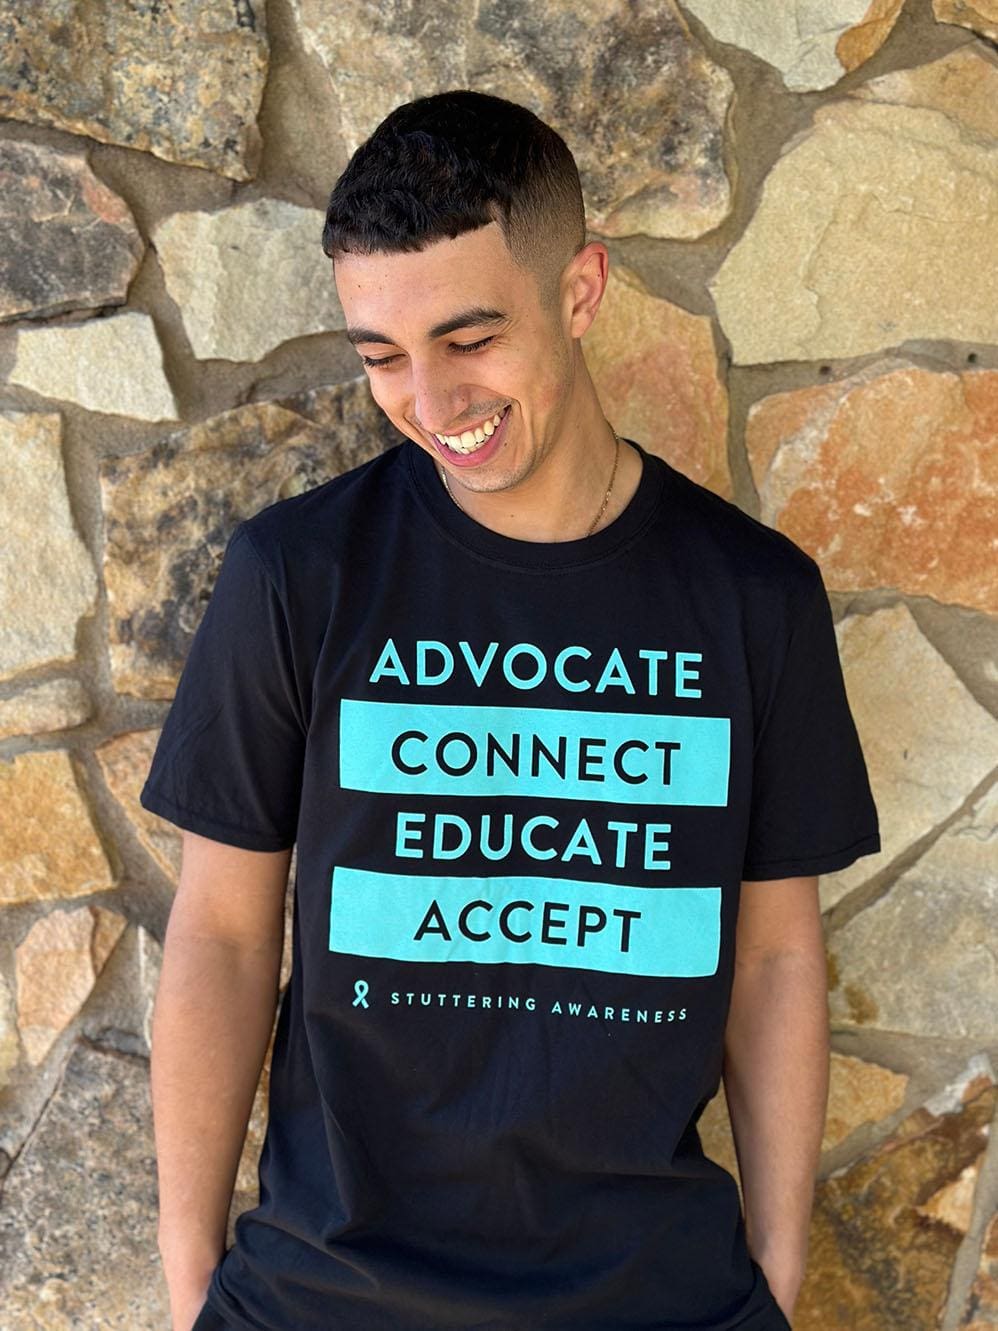 A young man smiling, wearing a black Advocate Tee with "advocate connect educate accept & stuttering awareness" printed in teal and white text, standing against a stone wall background.